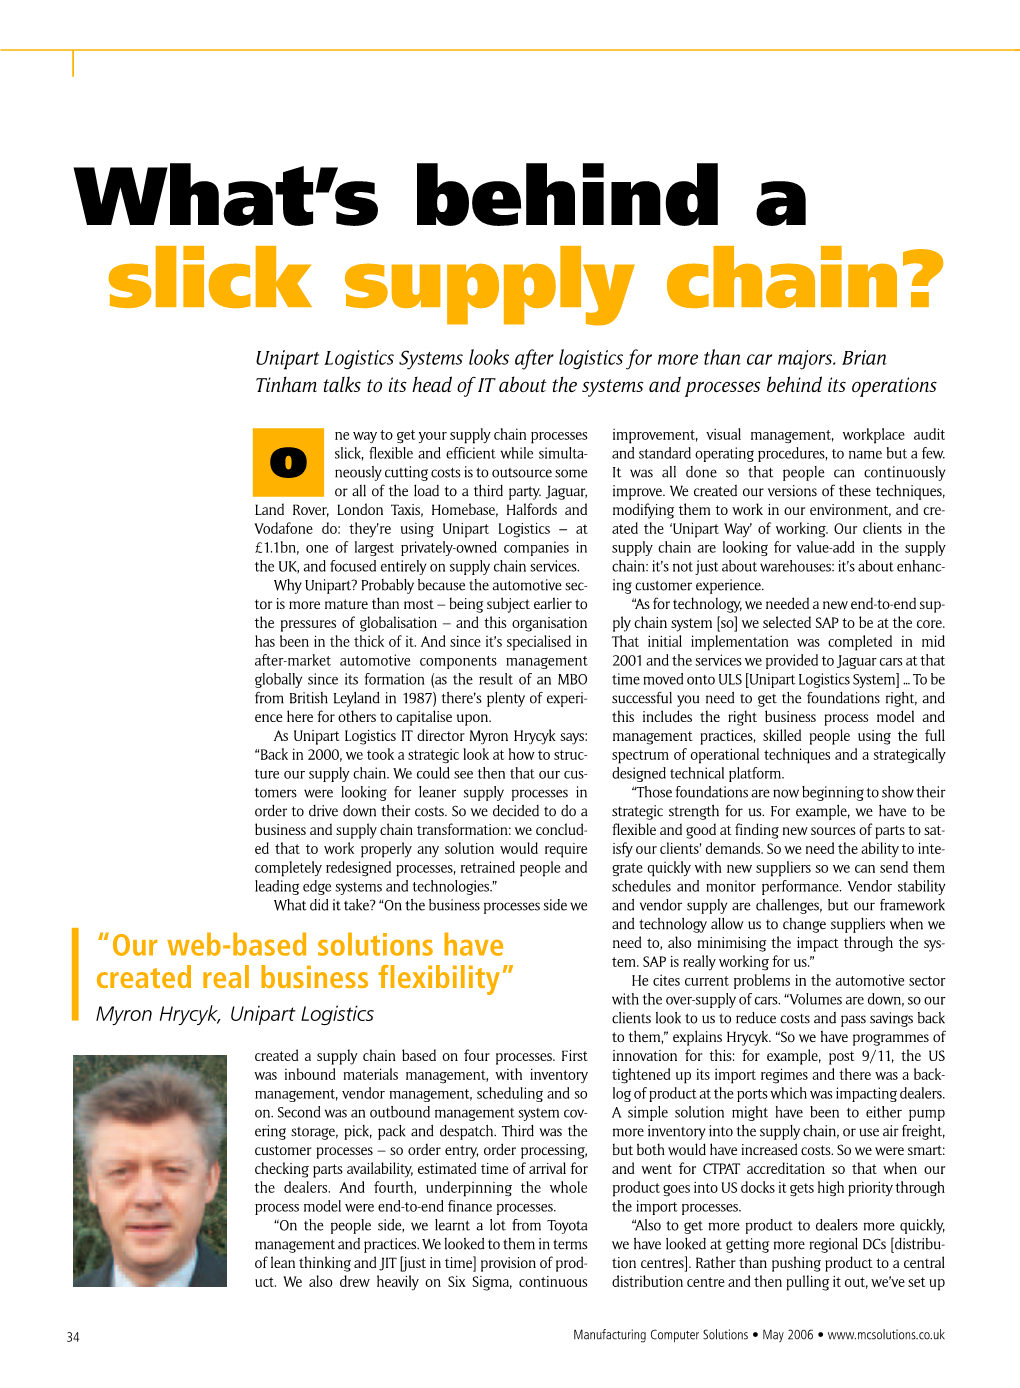 What's Behind a Slick Supply Chain?